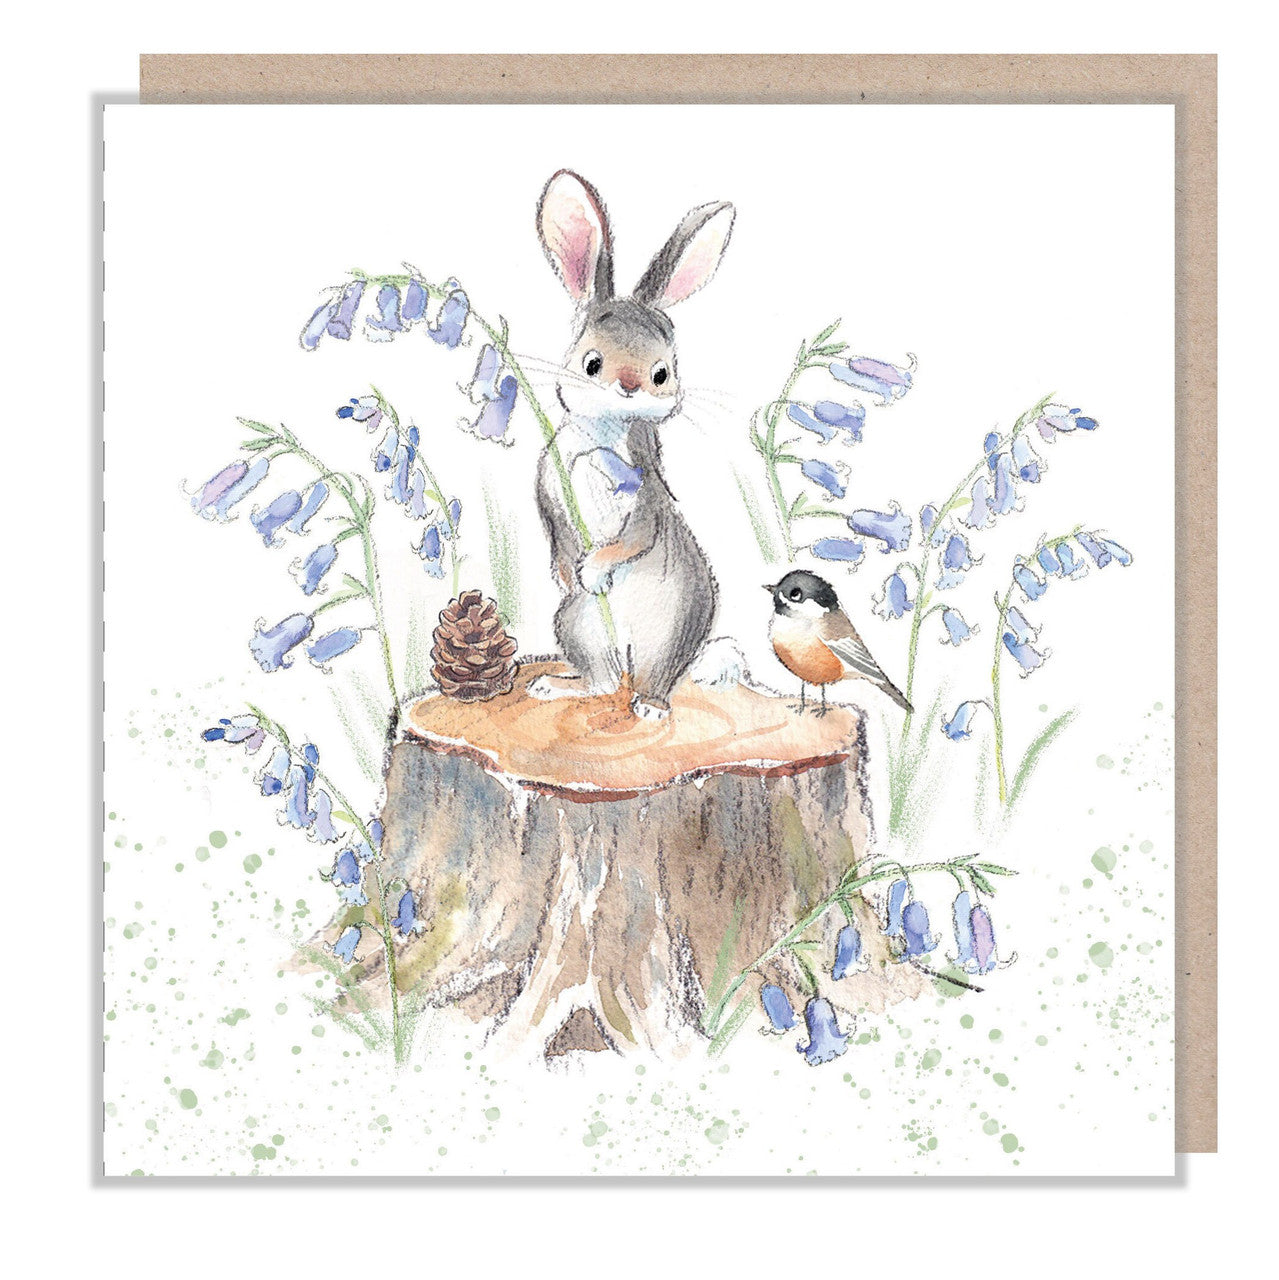 Rabbit on Tree Stump with Bluebells Greetings Card from Paper Shed Designs